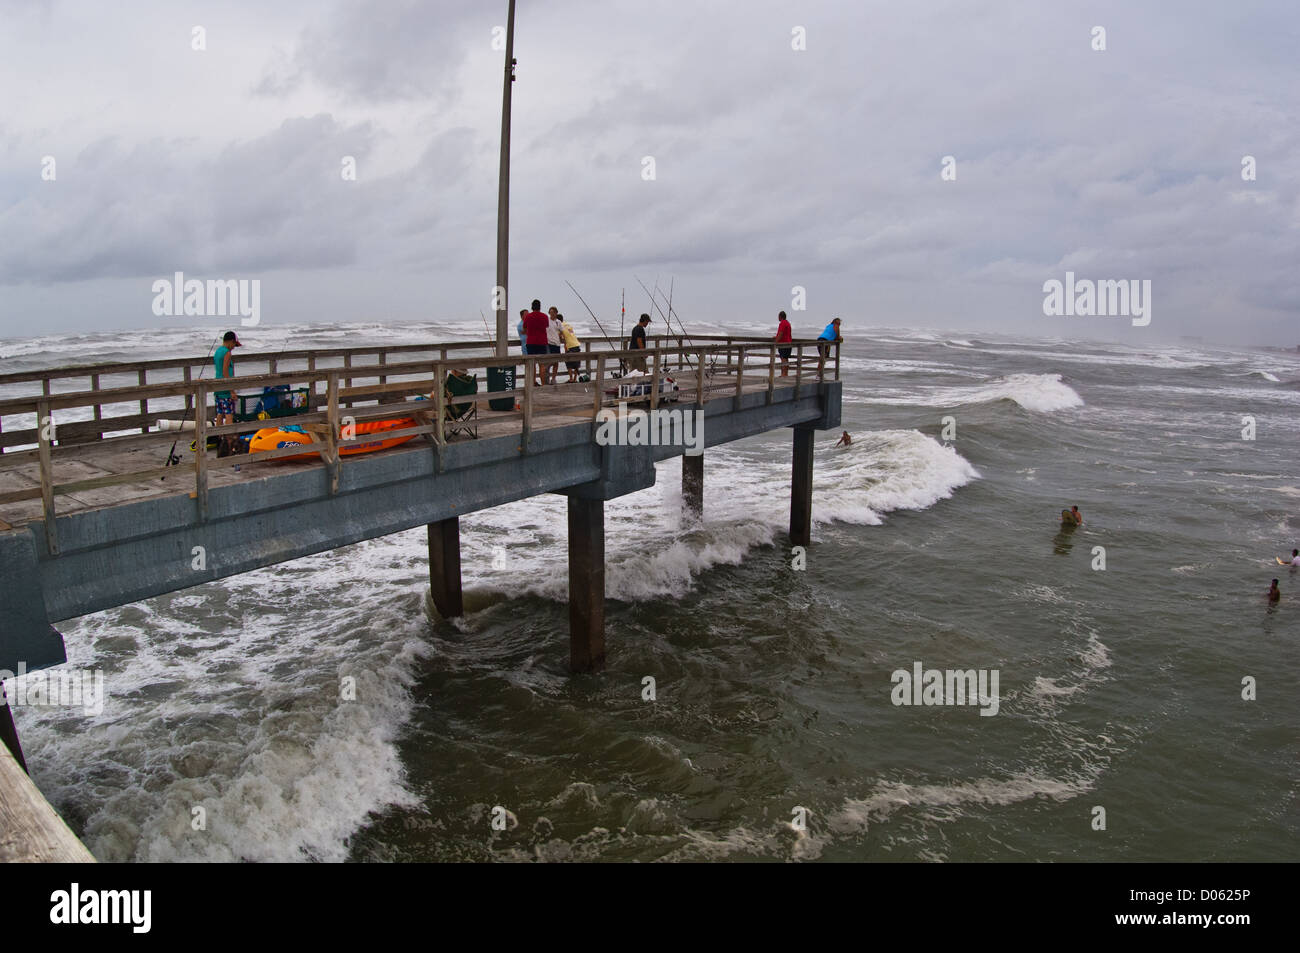 Surfers and fishermen at Horace Caldwell Pier during Hurricane Emily, Port Aransas Texas Stock Photo